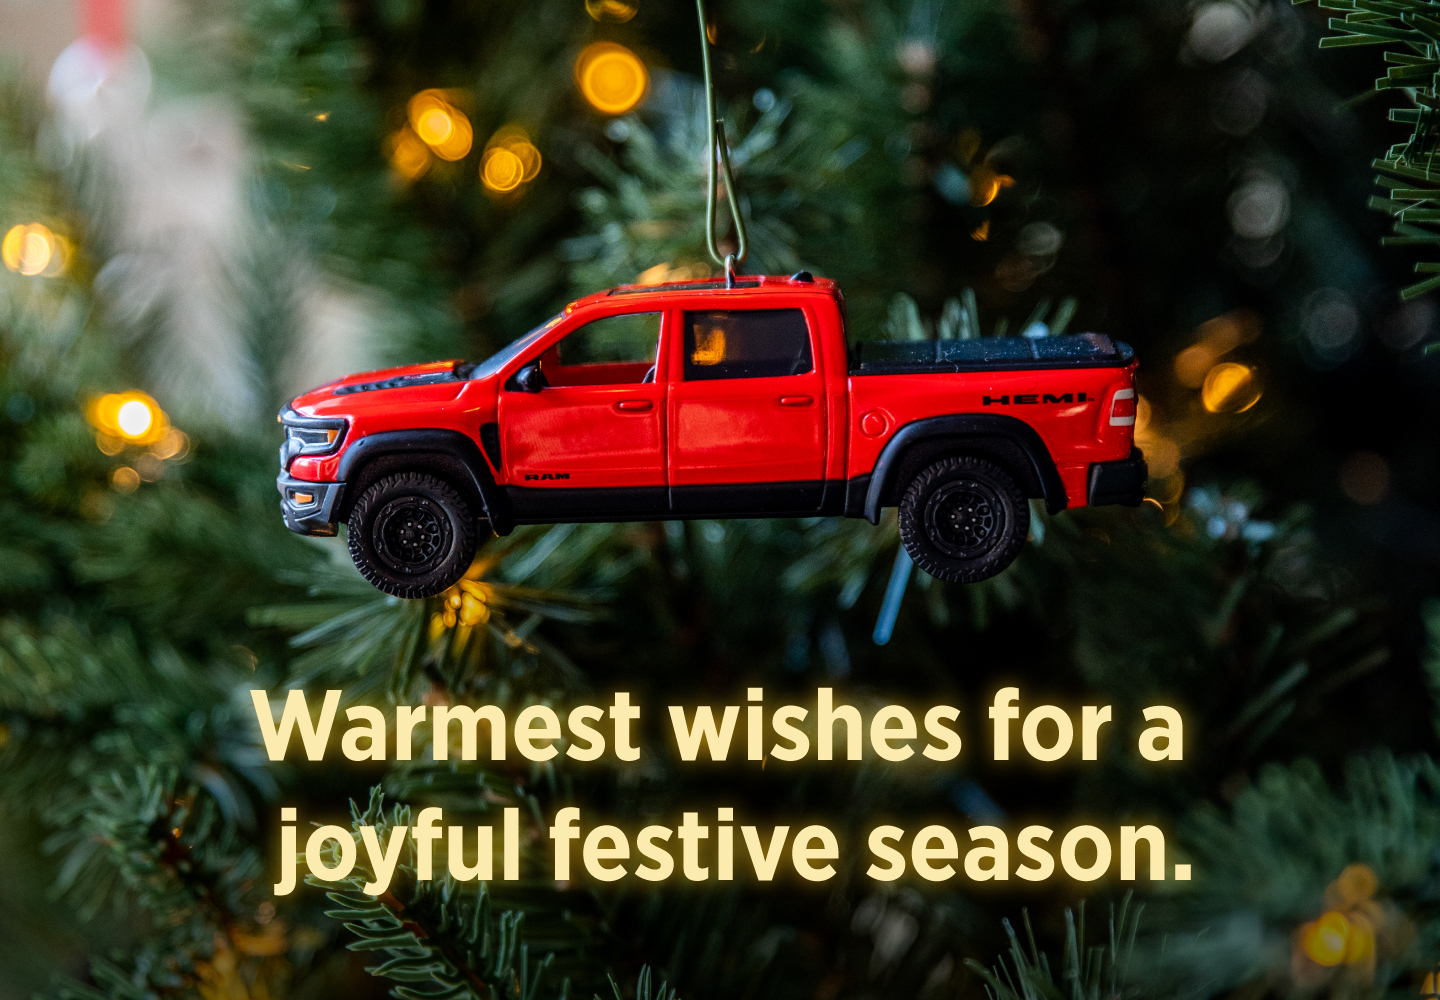 Red Ram truck ornament on a tree.